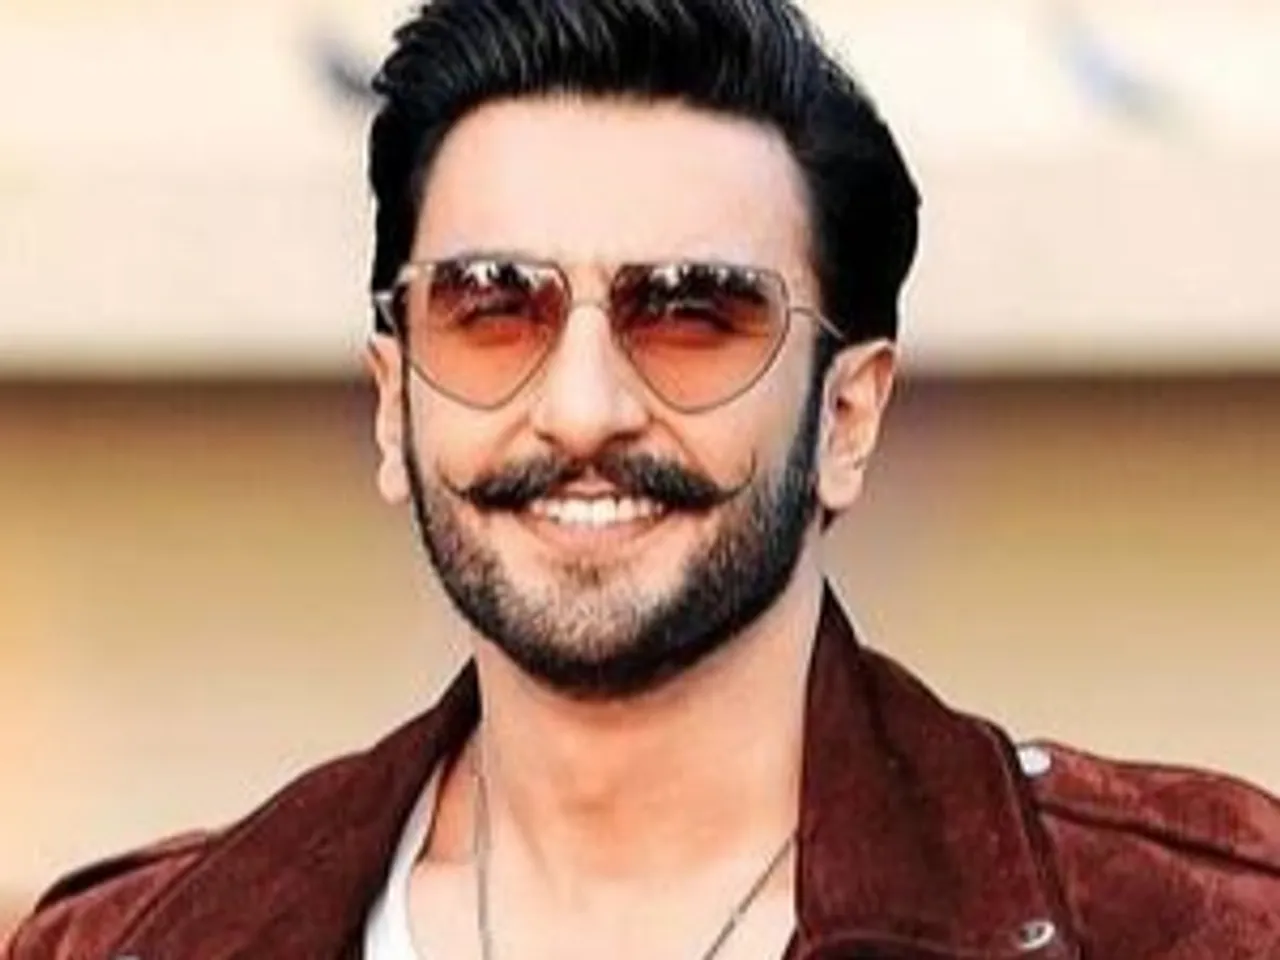 Ranveer Singh joins I&B Minister Anurag Thakur to represent India’s entertainment industry at the Dubai Expo on March 27th!